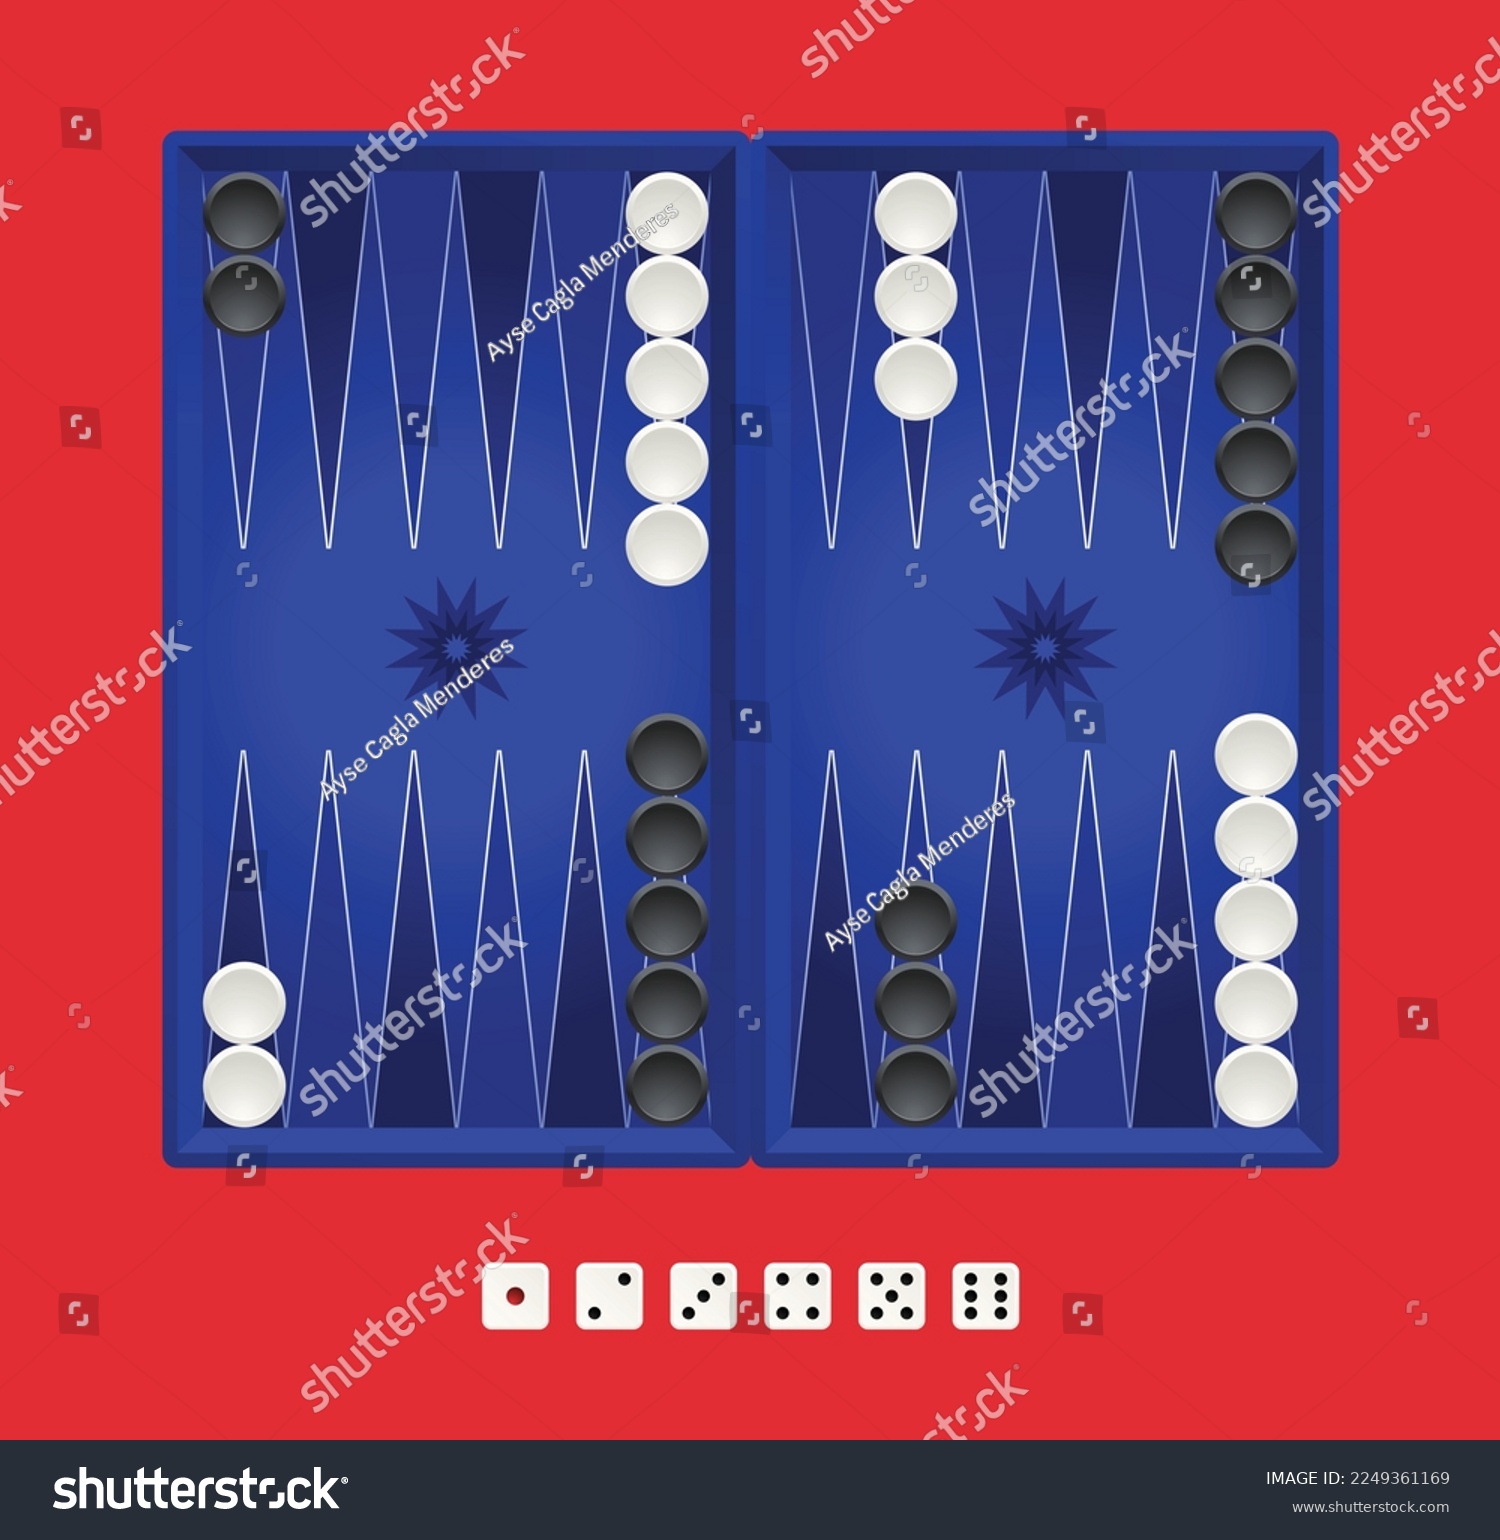 SVG of Backgammon board game with to colors svg